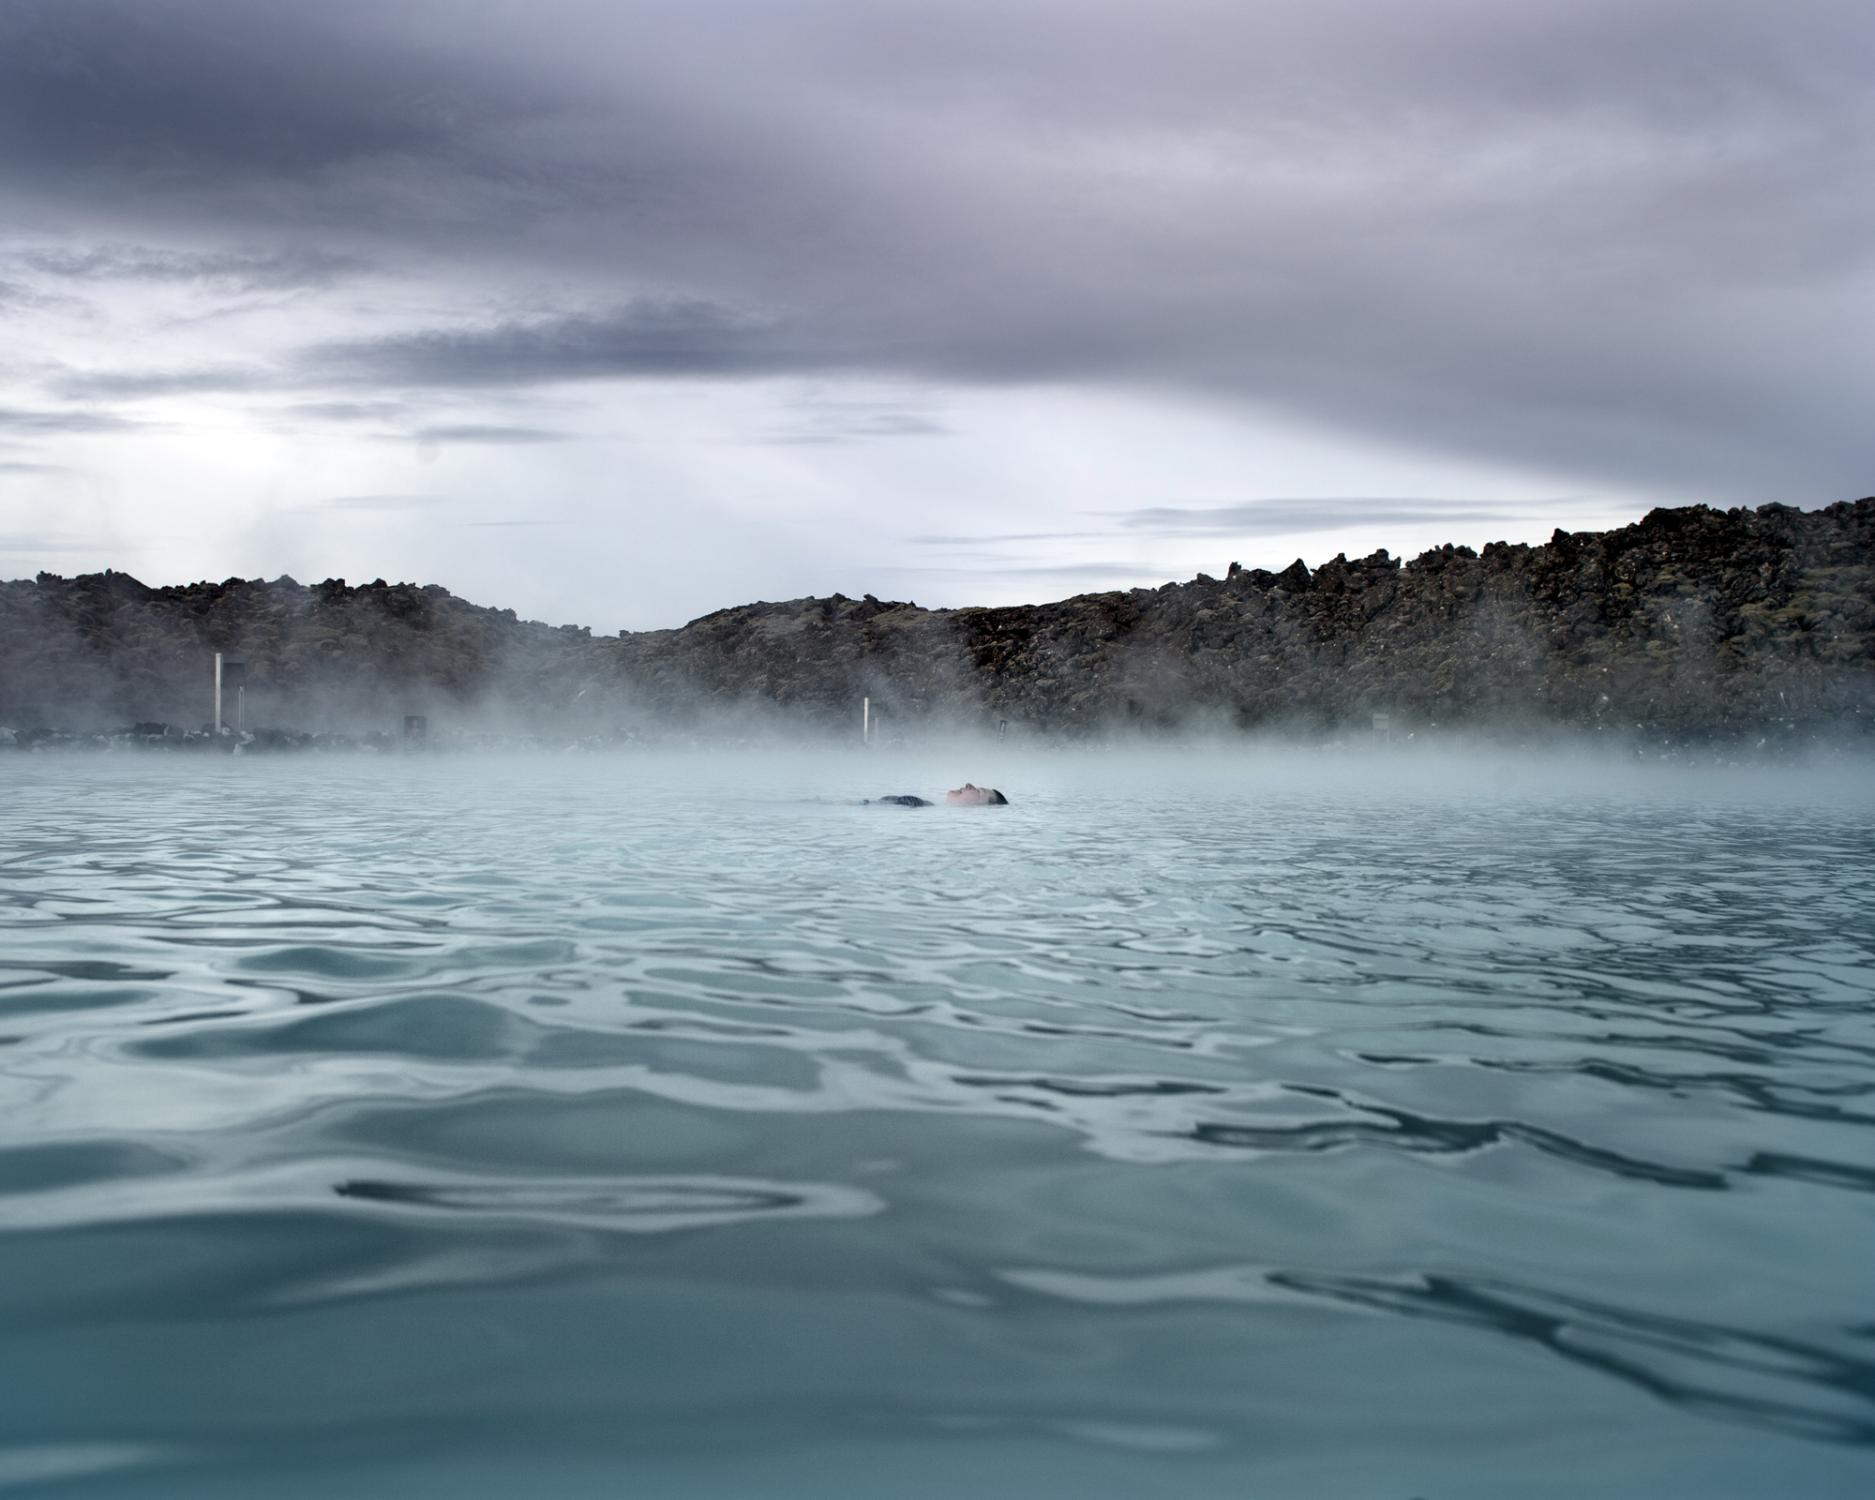 Steamland - Geothermal energy in Iceland.
August 2010.
Iceland....